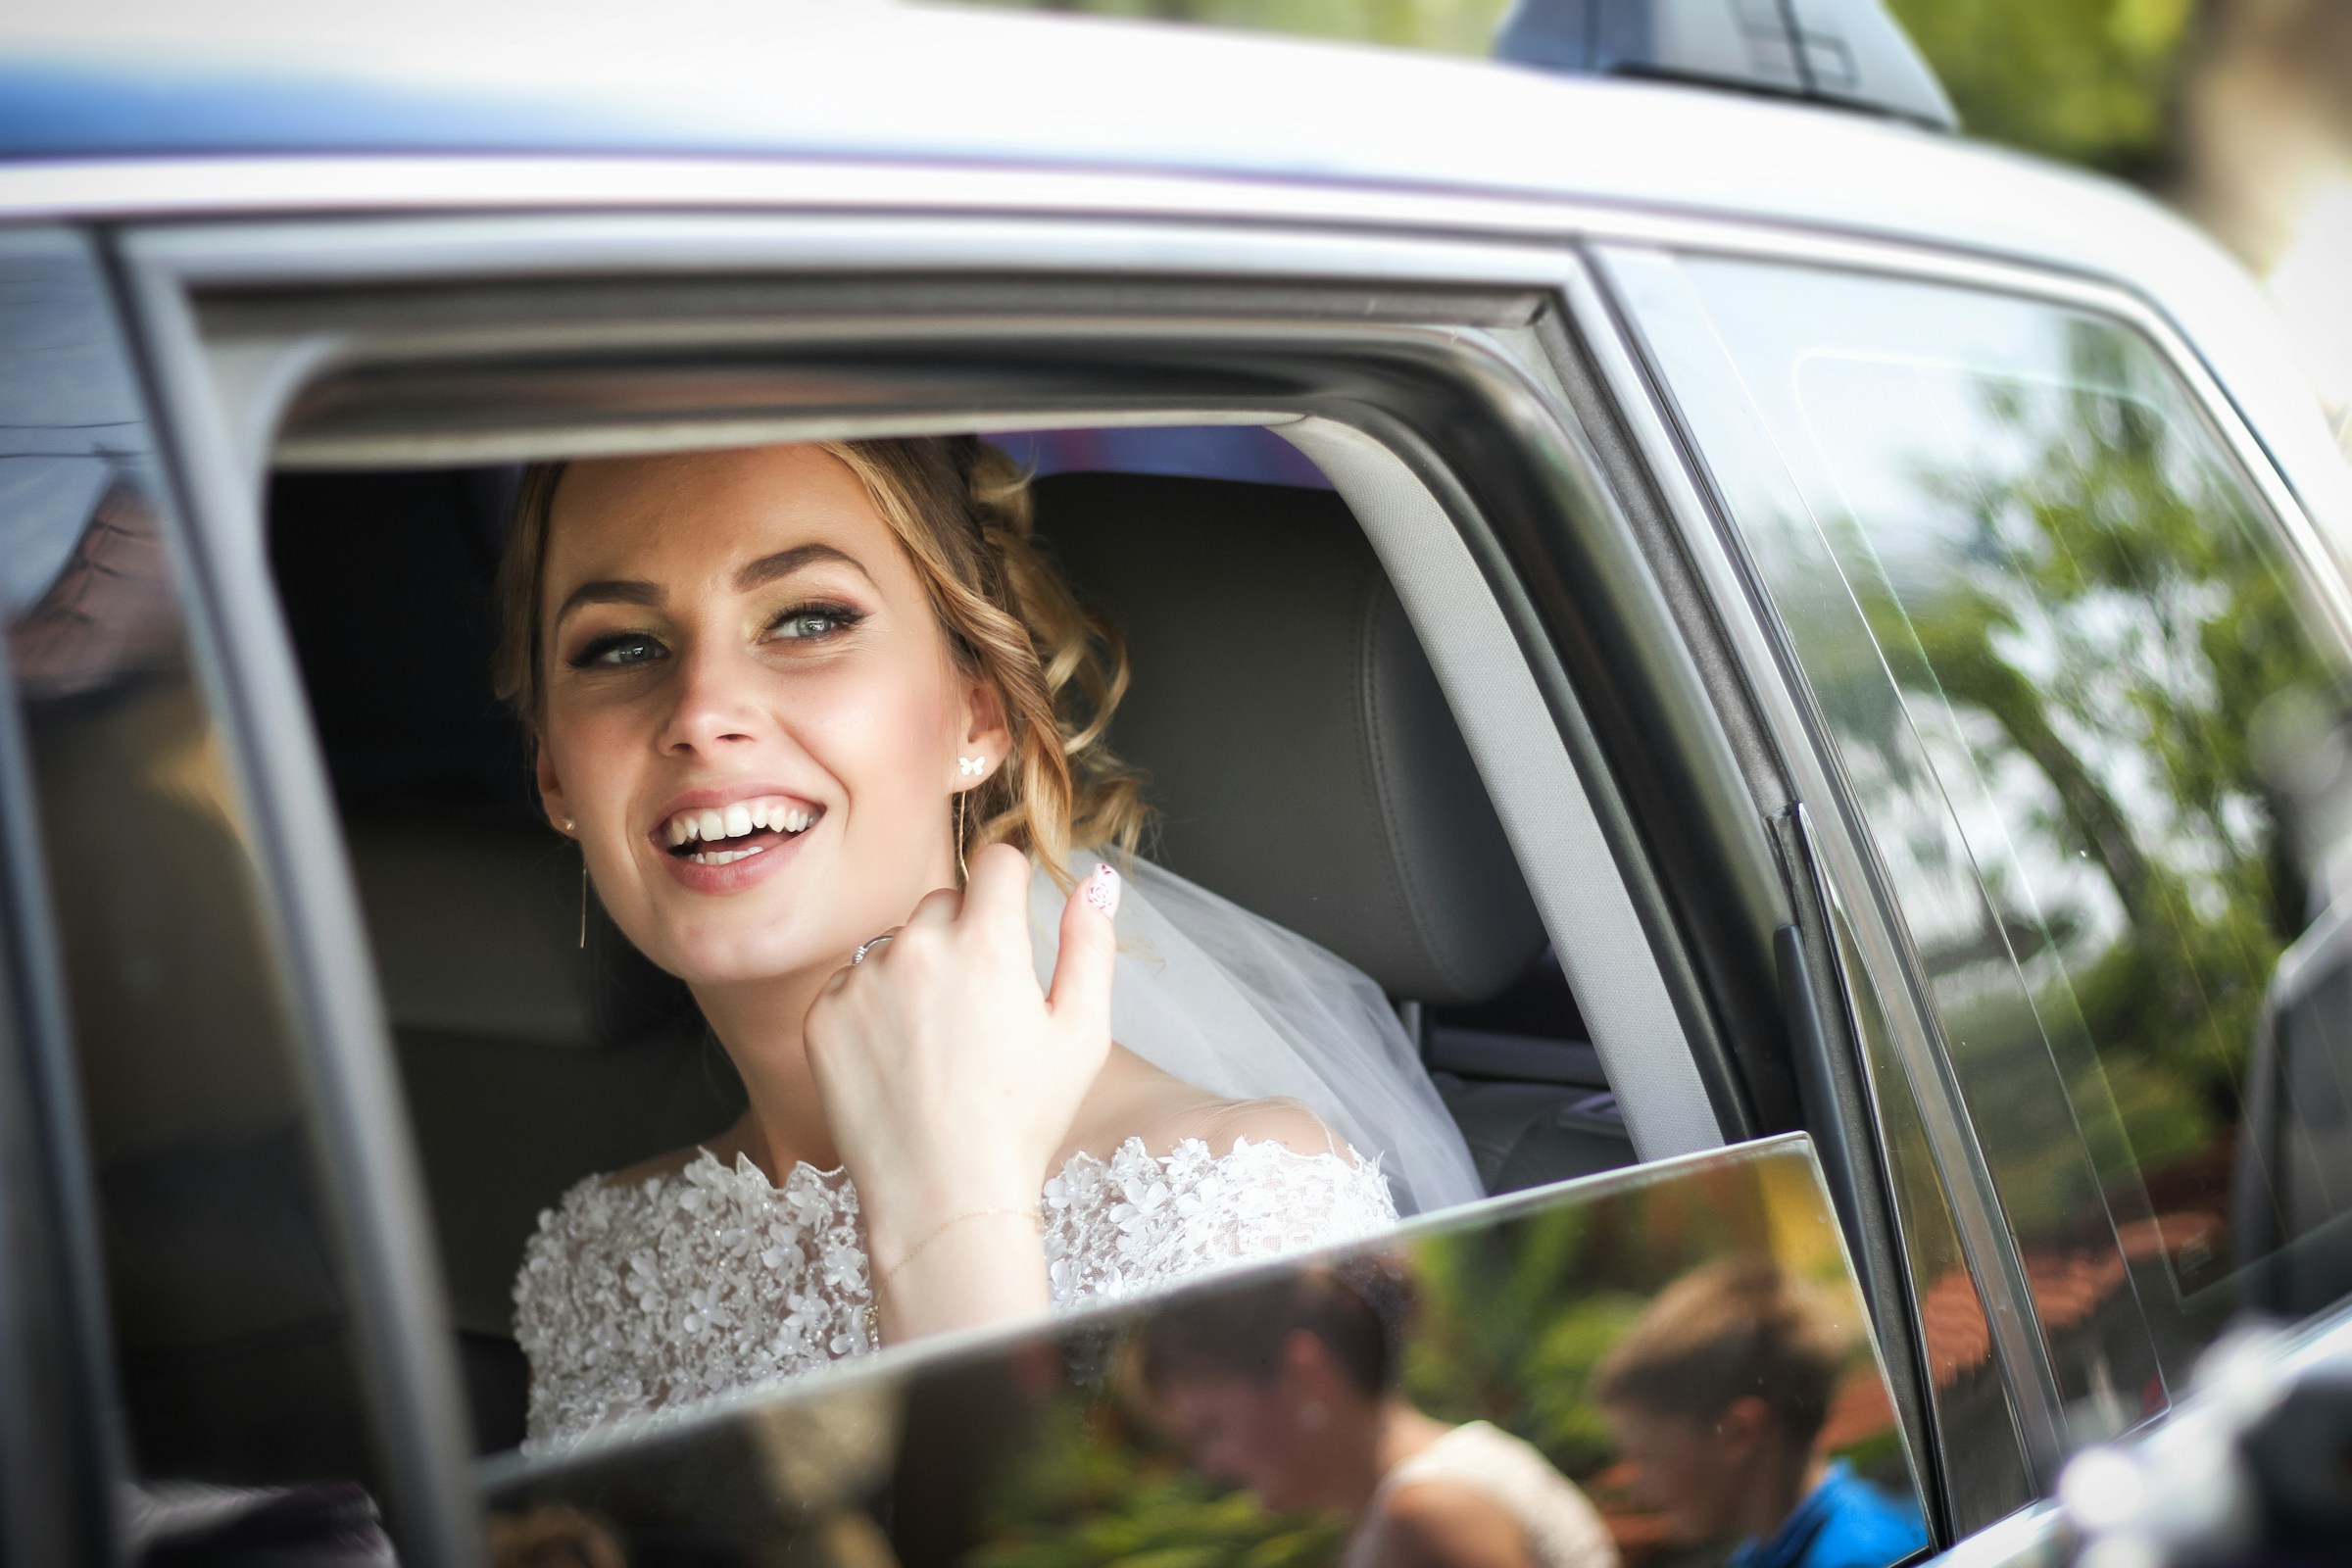 A bride in a car looking outside and smiling | Source: Unsplash